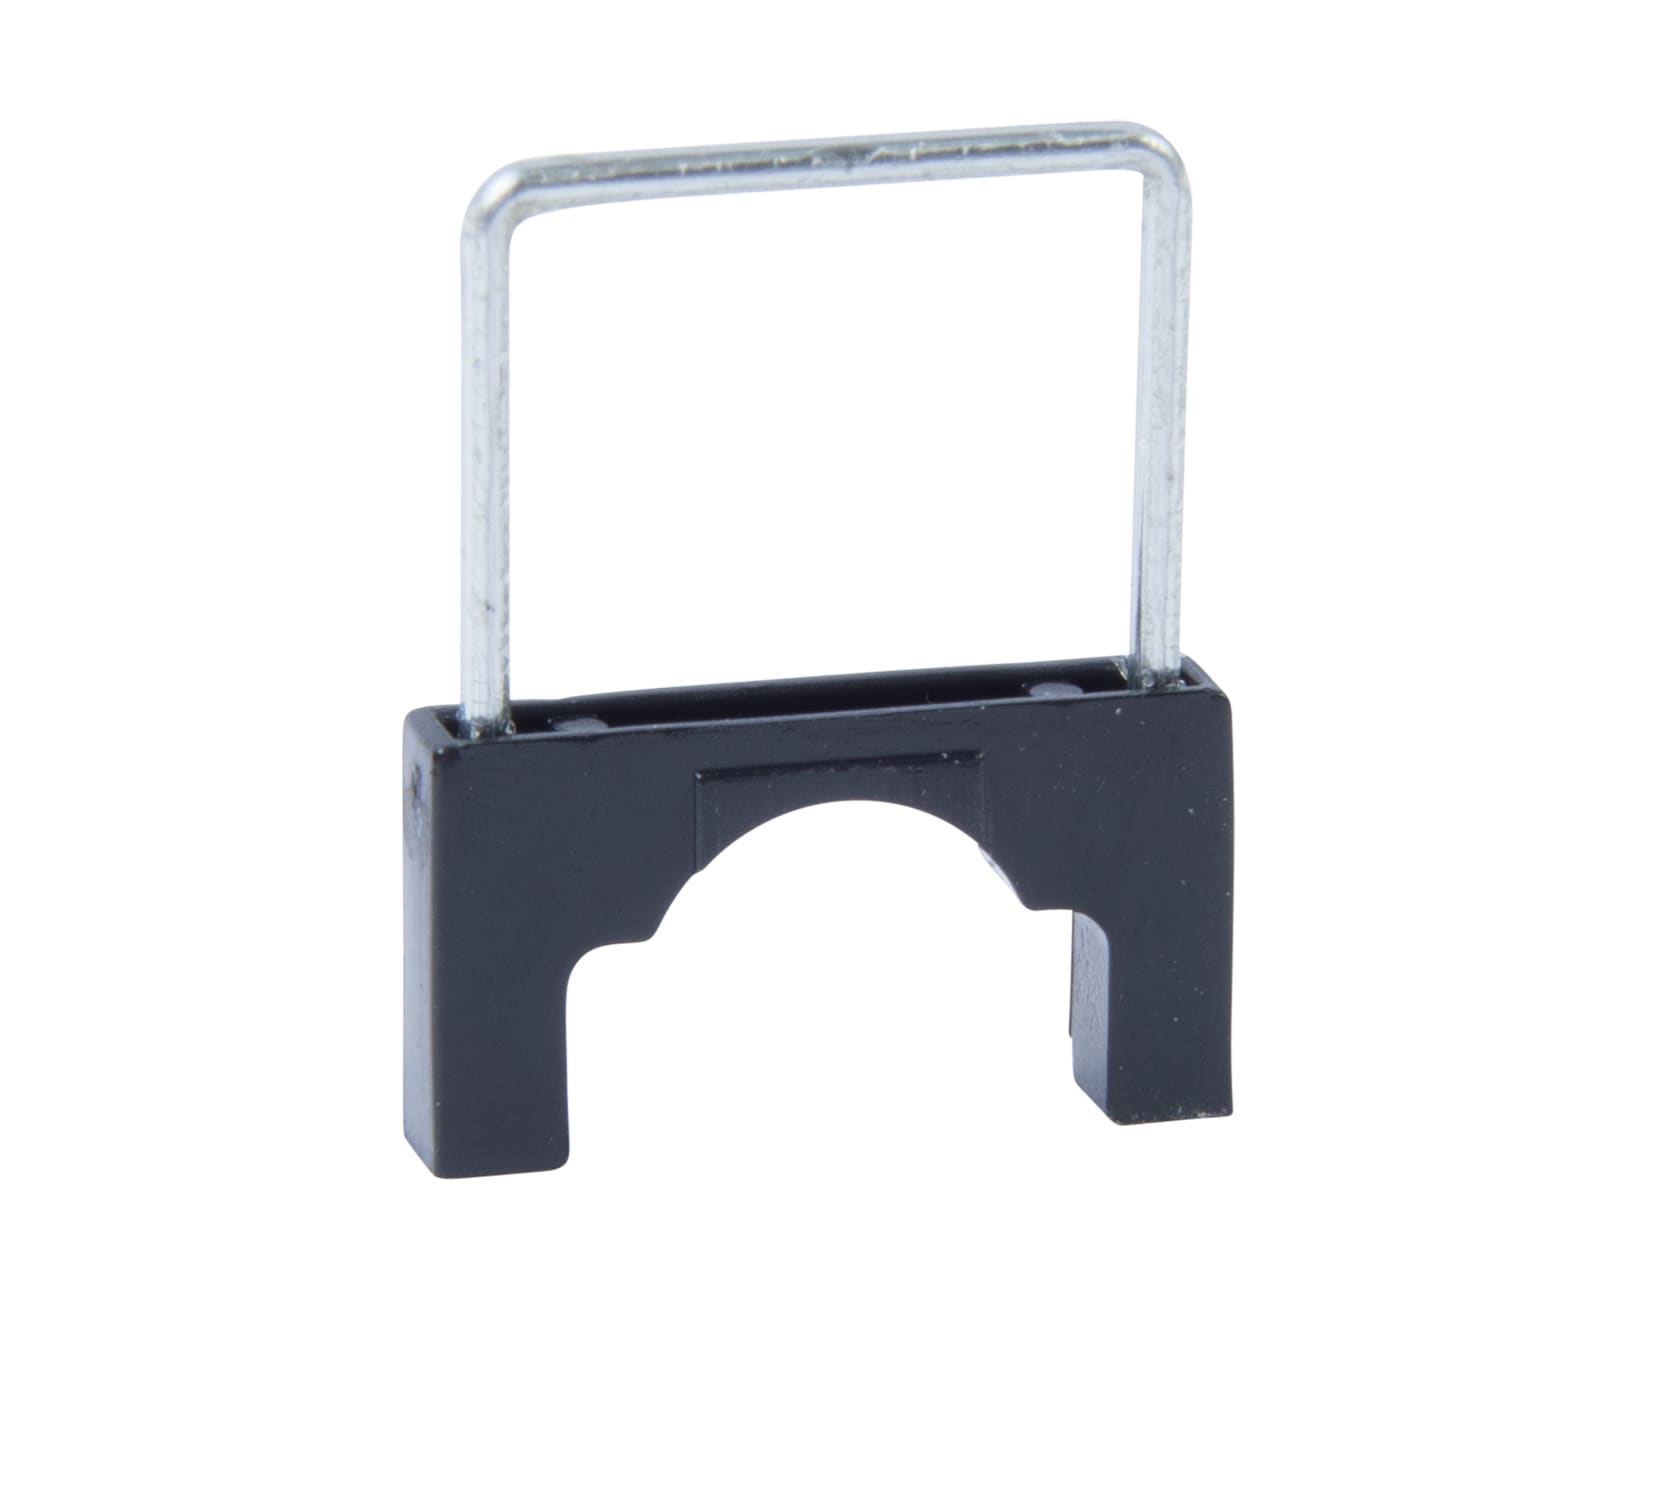 GARDNER BENDER Cable Staple: Cable Staple, 1/2 in Crown Wd, Steel, Plain,  Gray, 100 PK